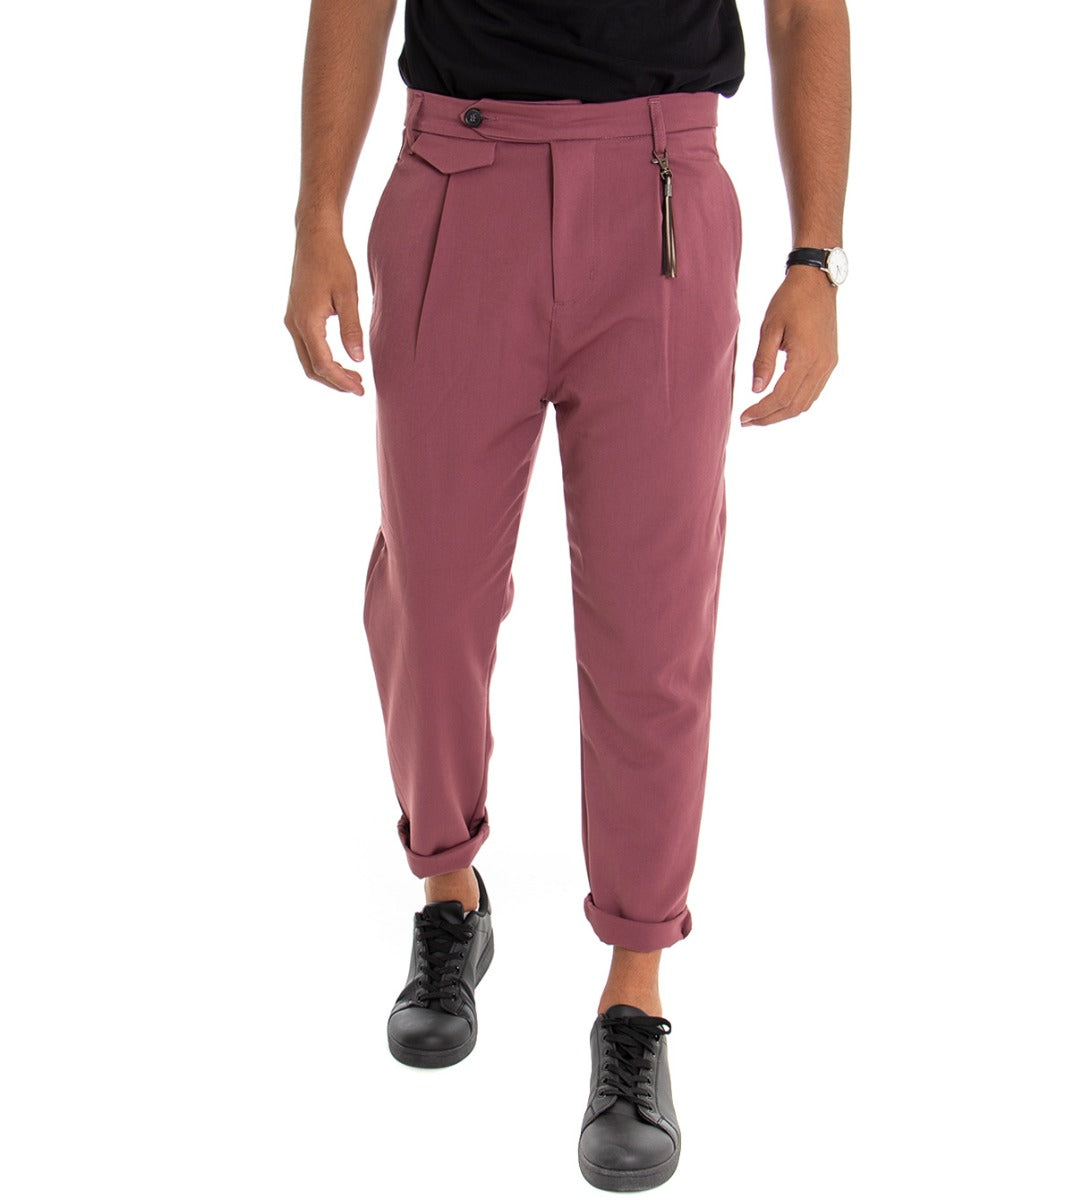 Classic Solid Color Long Men's Trousers Dark Pink Pinces Viscose GIOSAL